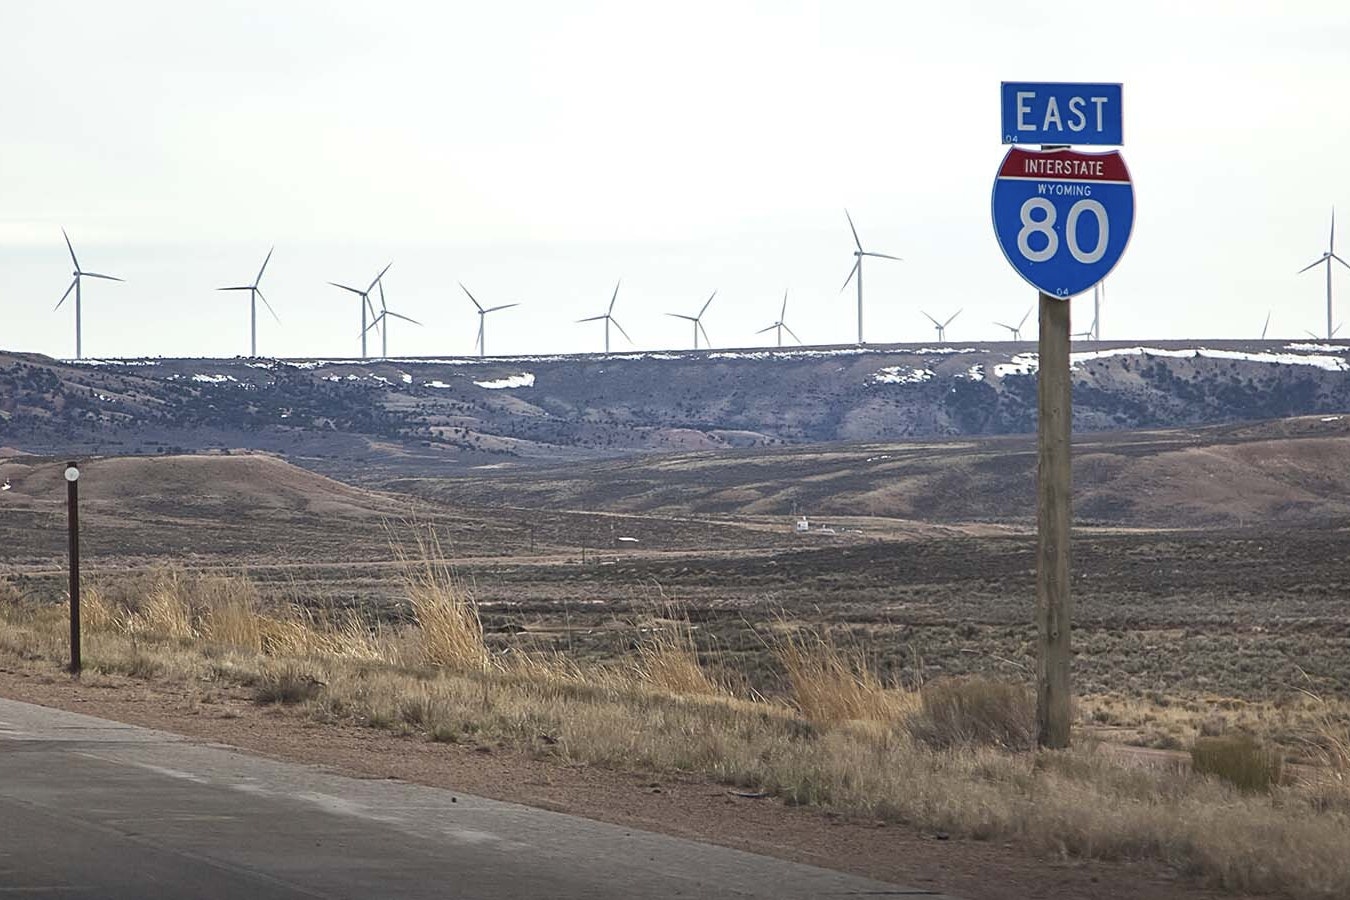 A row of wind turbines visible driving east on Interstate 80 across southern Wyoming.